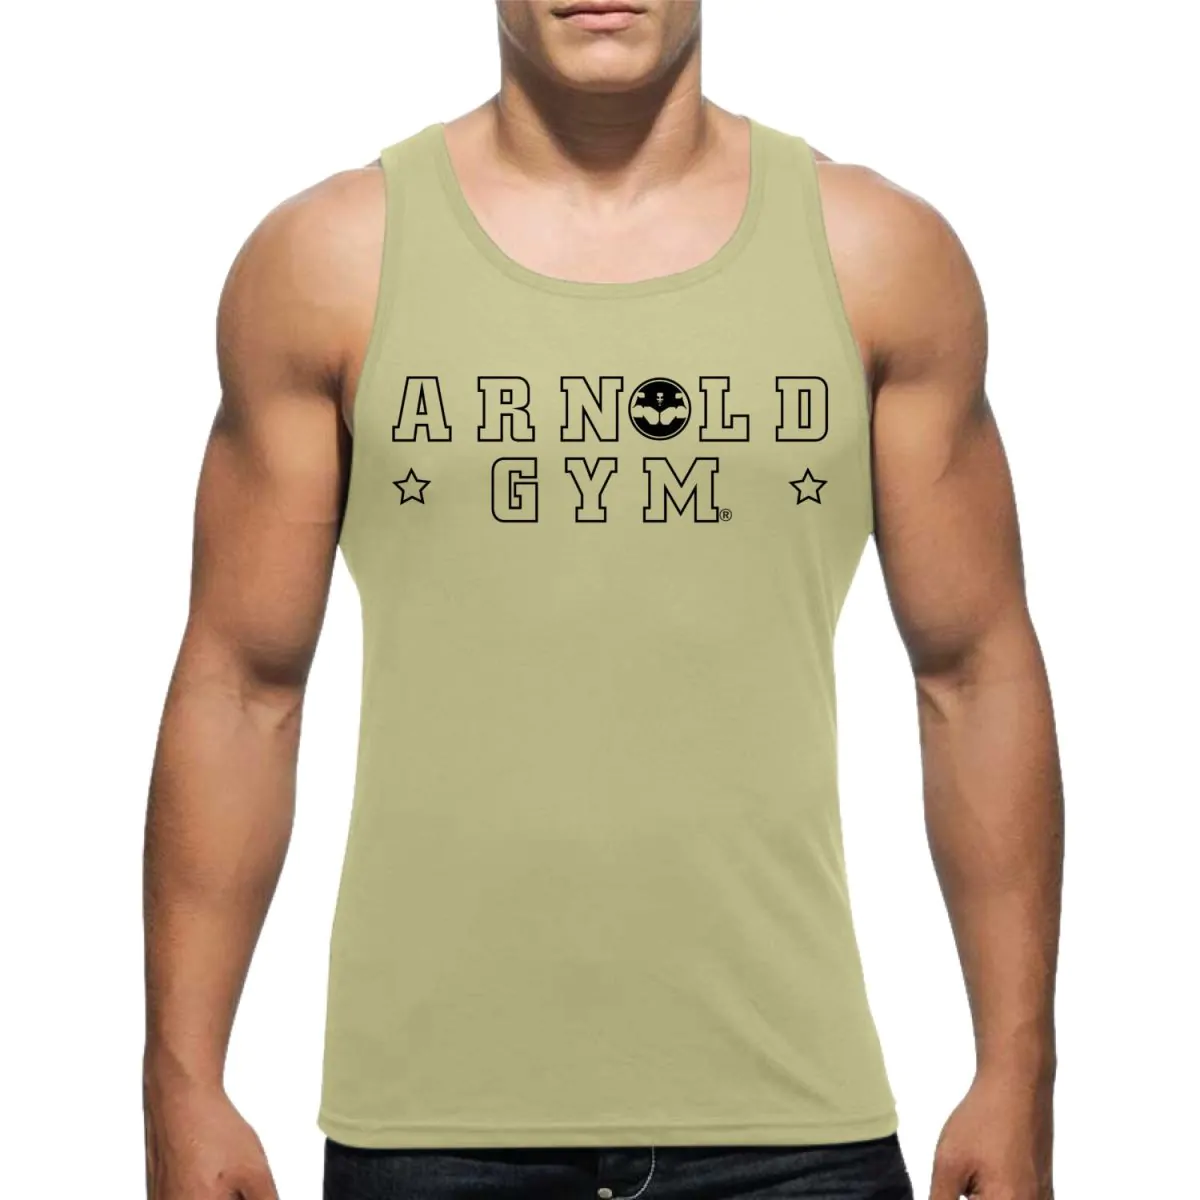 arnold gym dry fit top basic muscle cut in desert sand green